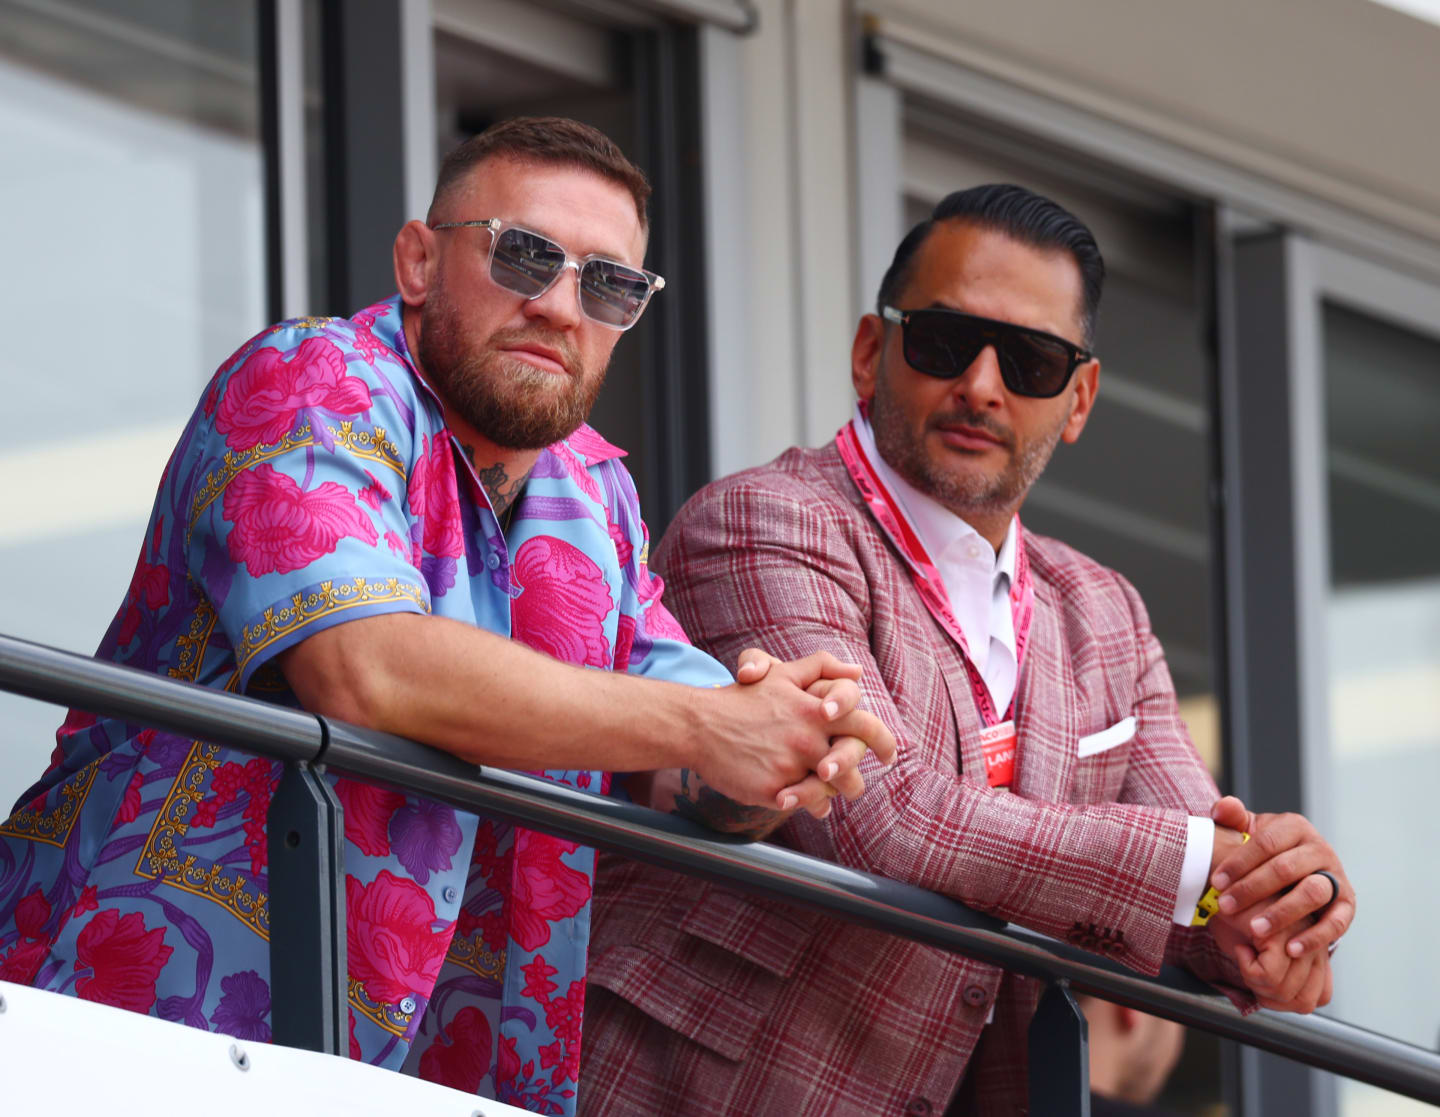 MONTE-CARLO, MONACO - MAY 28: Conor McGregor watches the action from the pitlane during qualifying ahead of the F1 Grand Prix of Monaco at Circuit de Monaco on May 28, 2022 in Monte-Carlo, Monaco. (Photo by Mark Thompson/Getty Images)